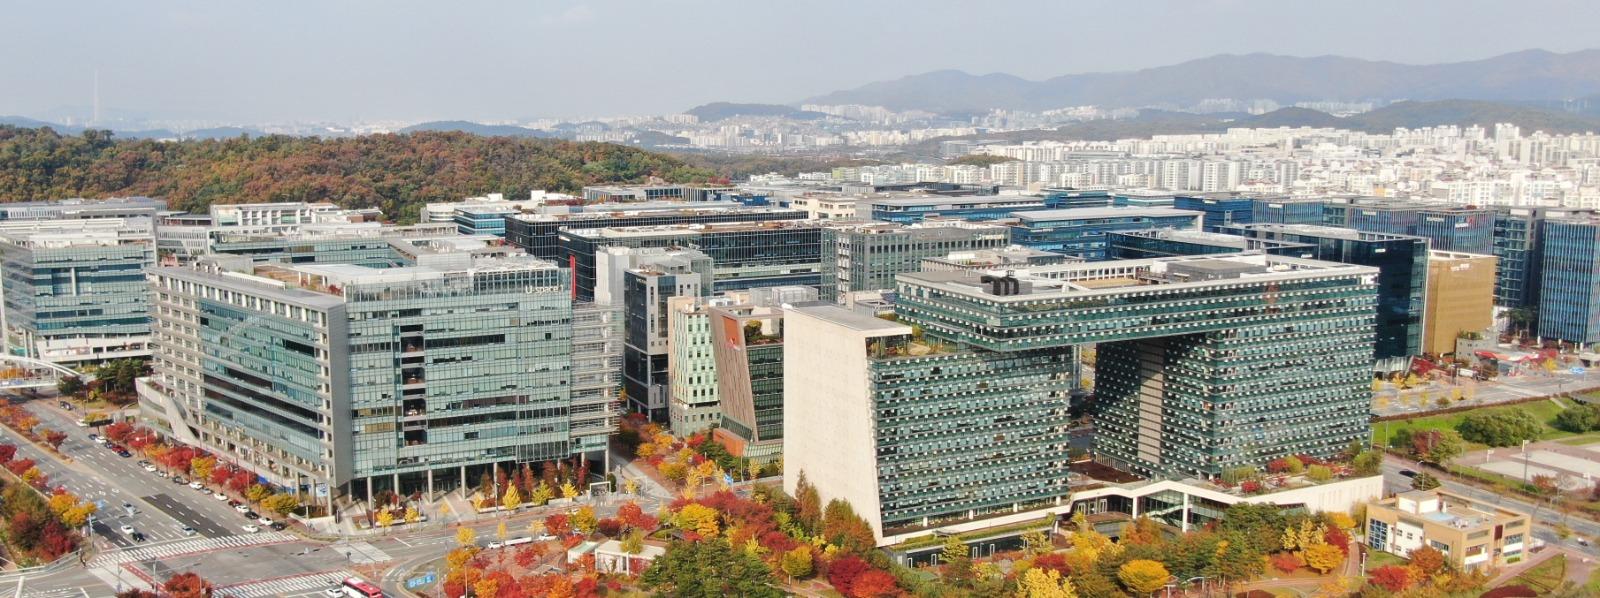 View of Pangyo Techno Valley (Image source: Pangyo Techno Valley website)